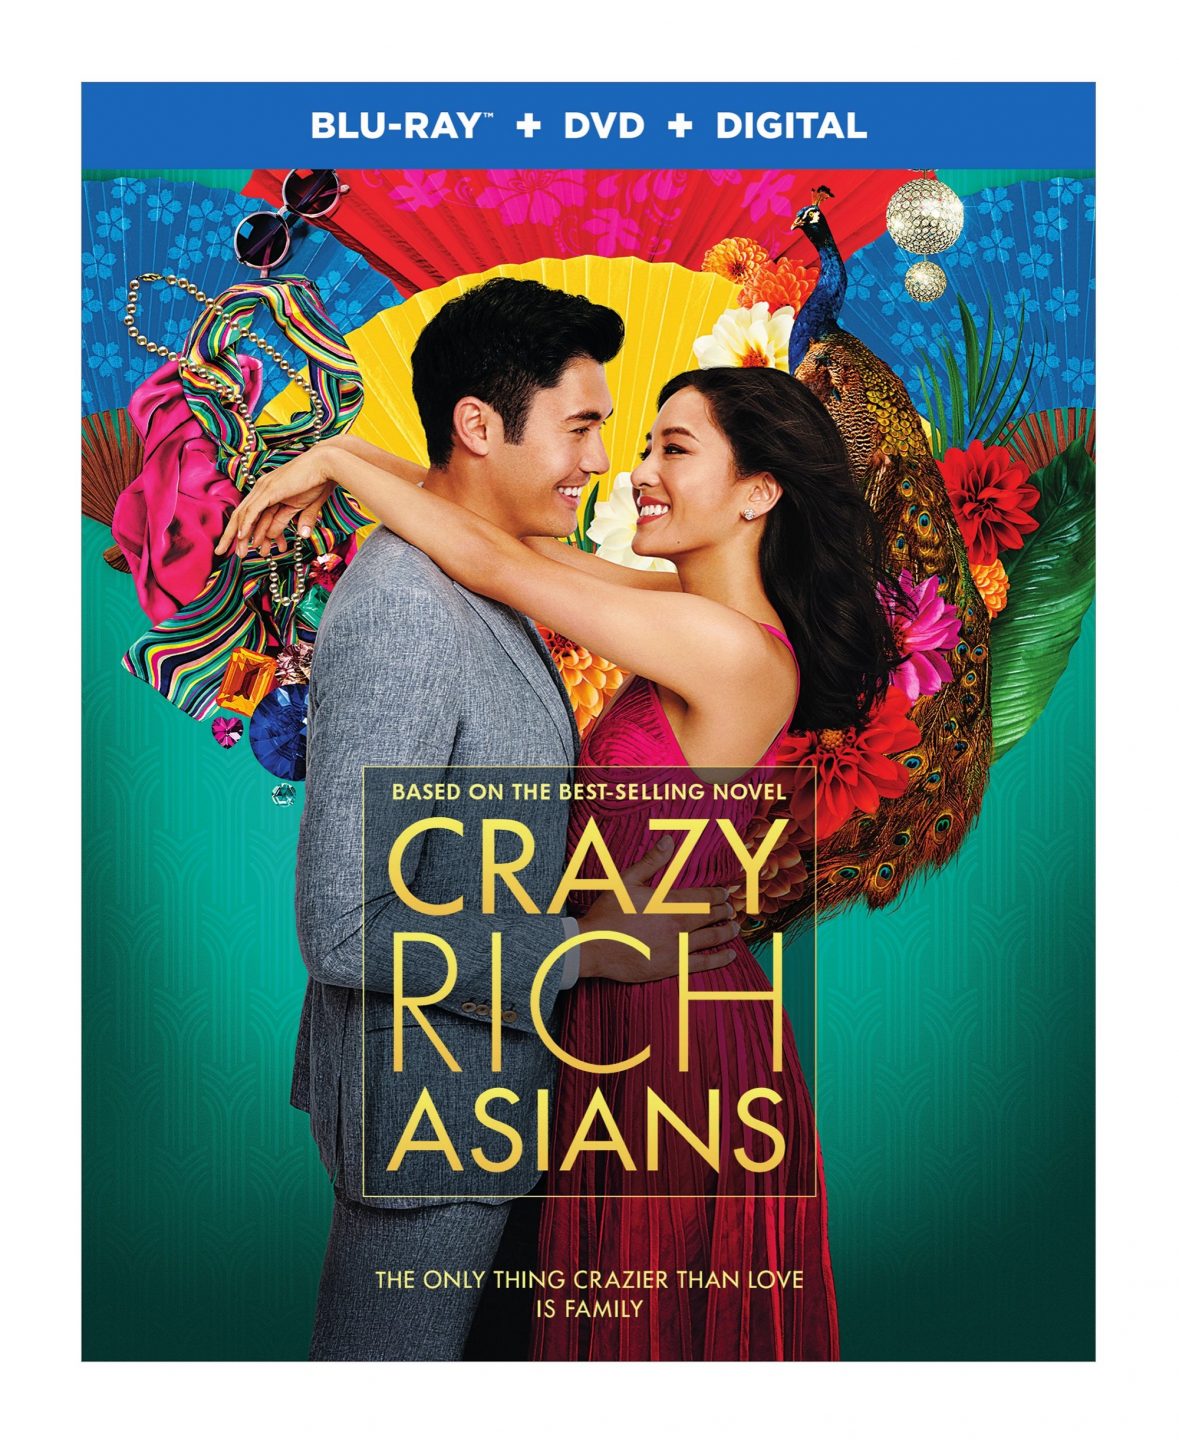 Crazy Rich Asians Blu-Ray Combo pack cover (Warner Bros. Home Entertainment)